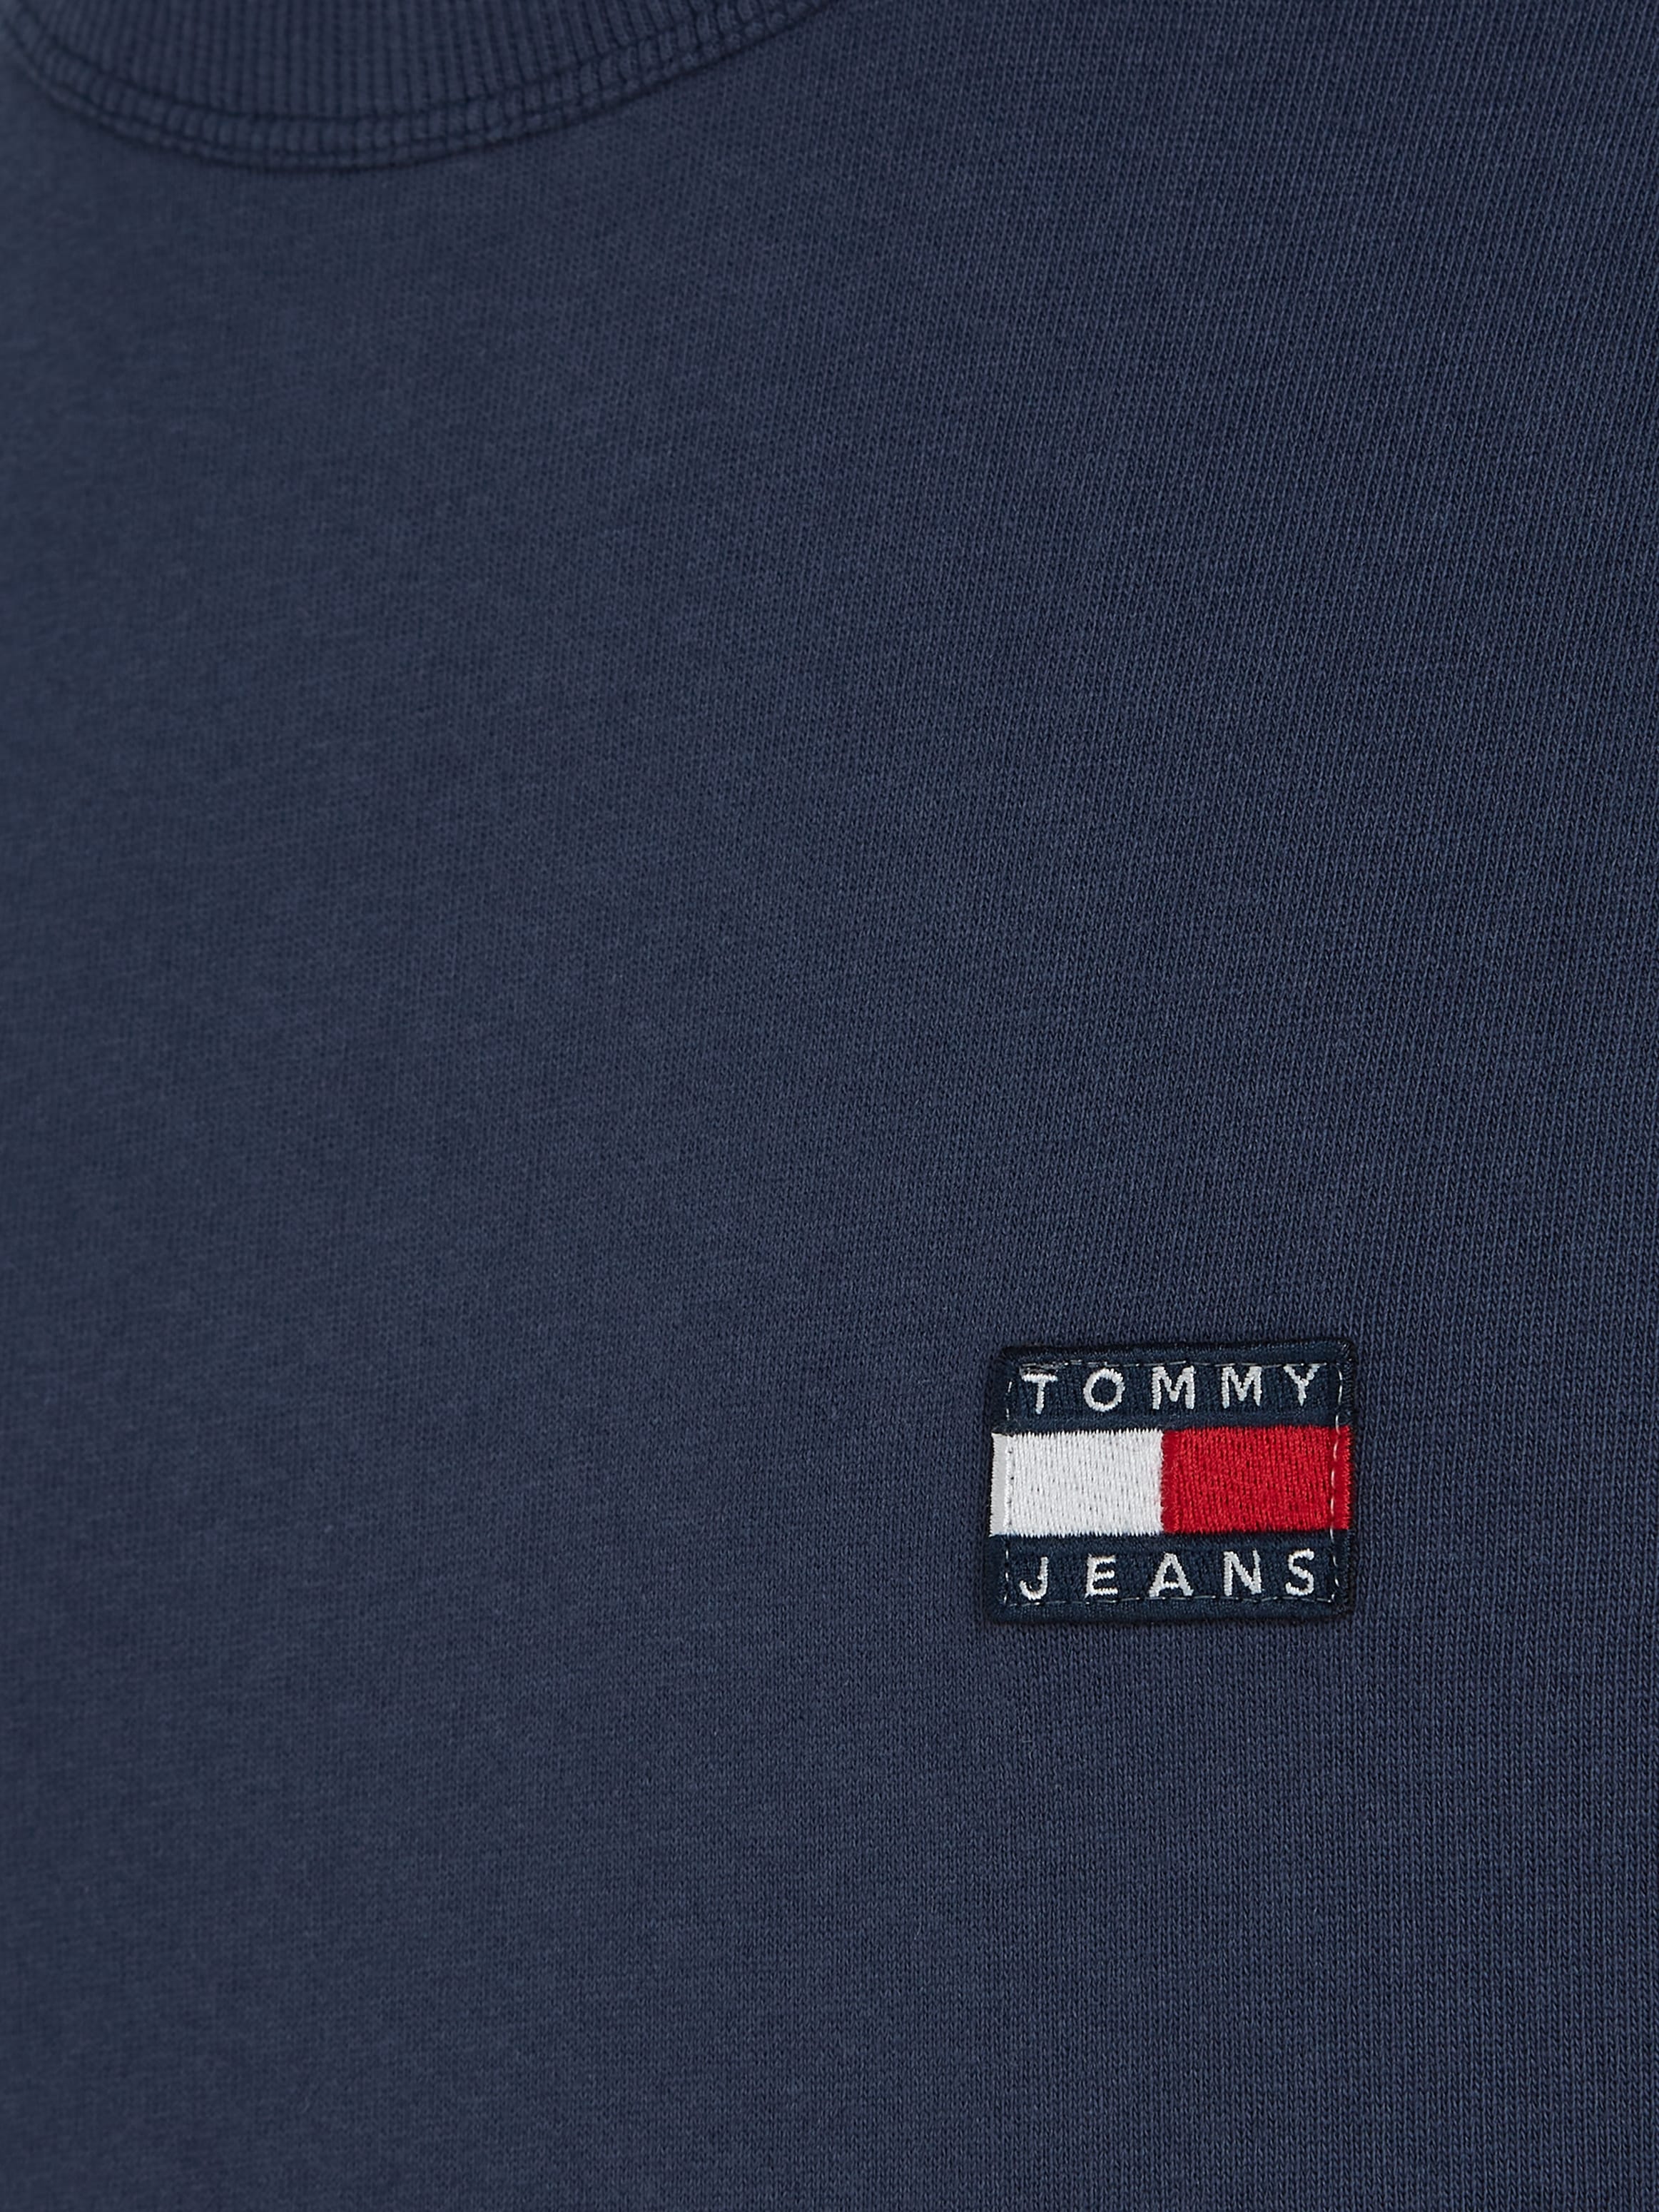 Tommy Jeans T-Shirt »TJM TEE« CLSC OTTO BADGE XS TOMMY shoppen online bei